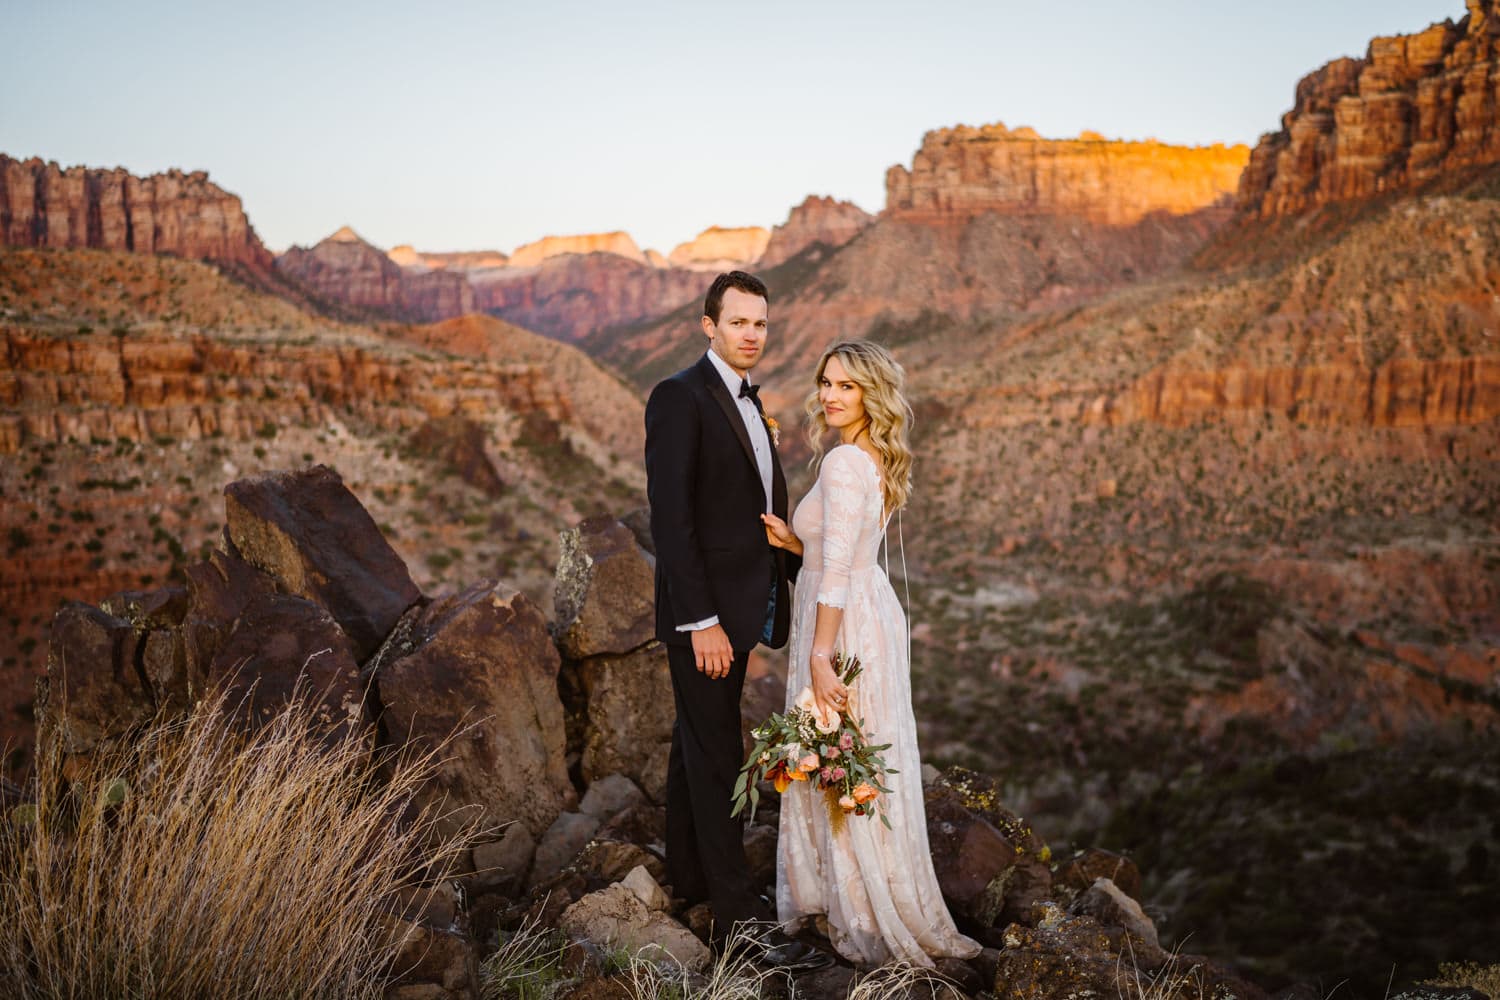 Bride and groom at sunset in the desert elopement